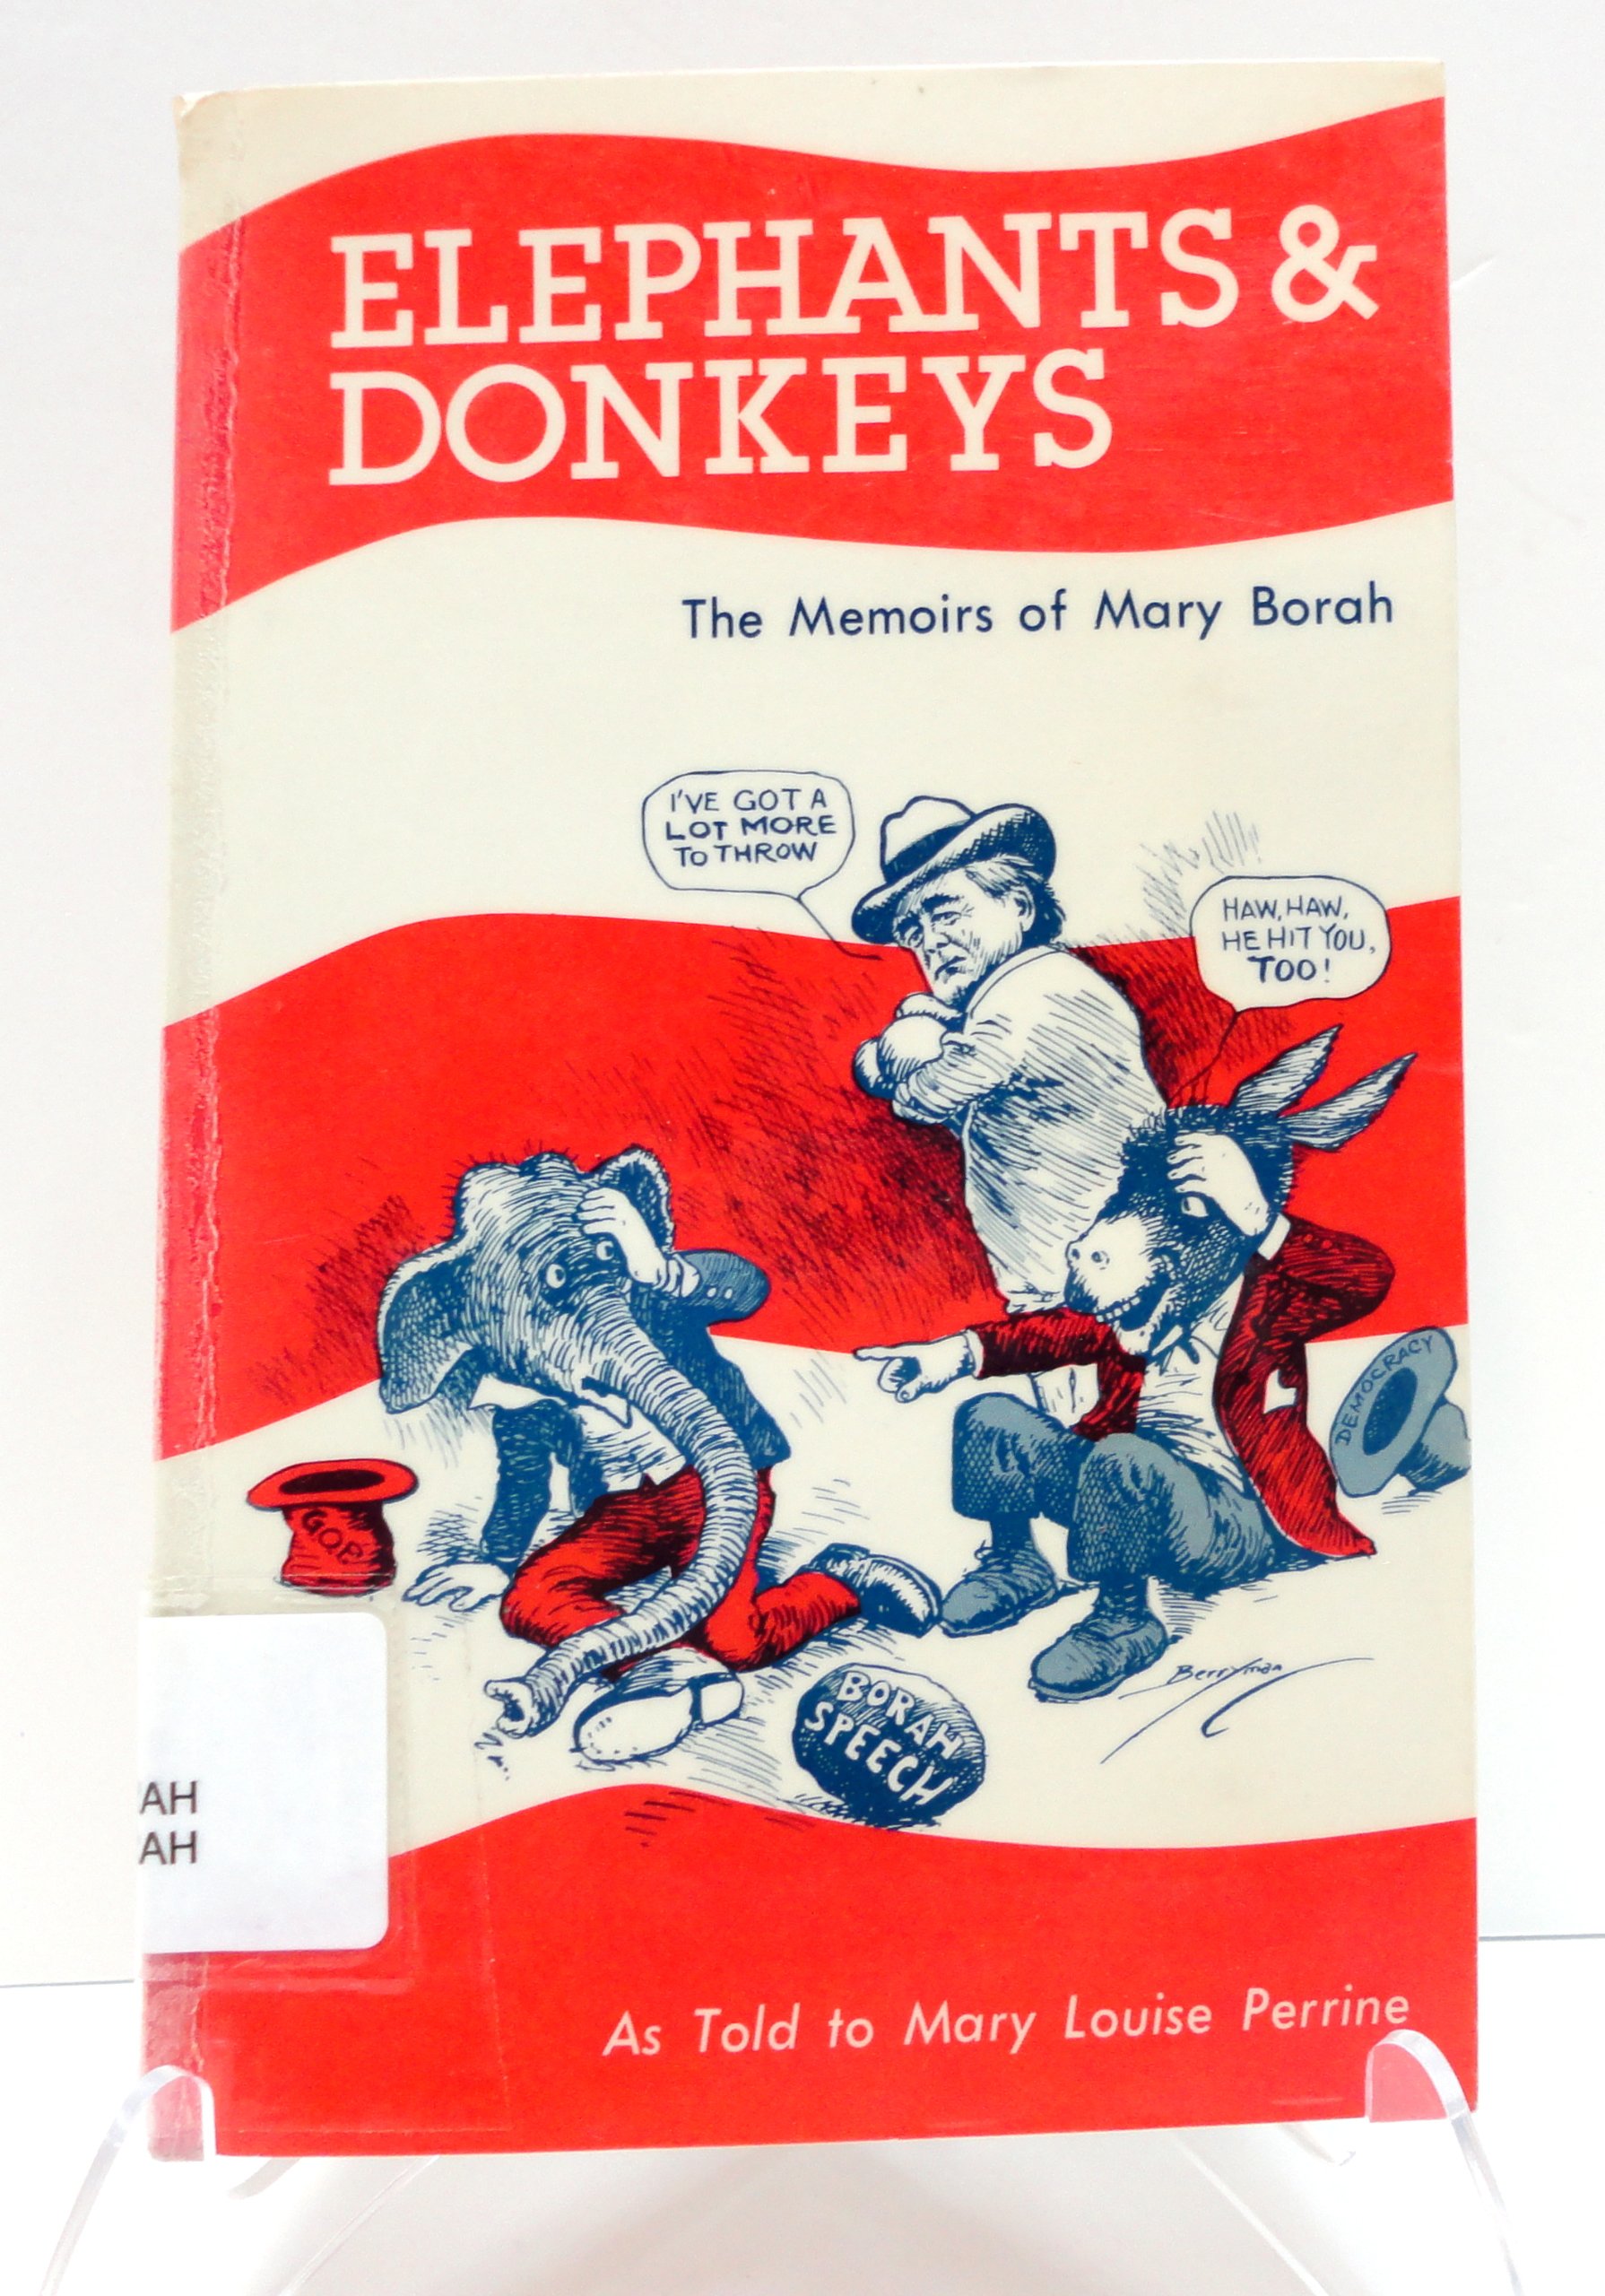 Elephants and donkeys: The memoirs of Mary Borah as told to Mary Louise Perrine (book cover)